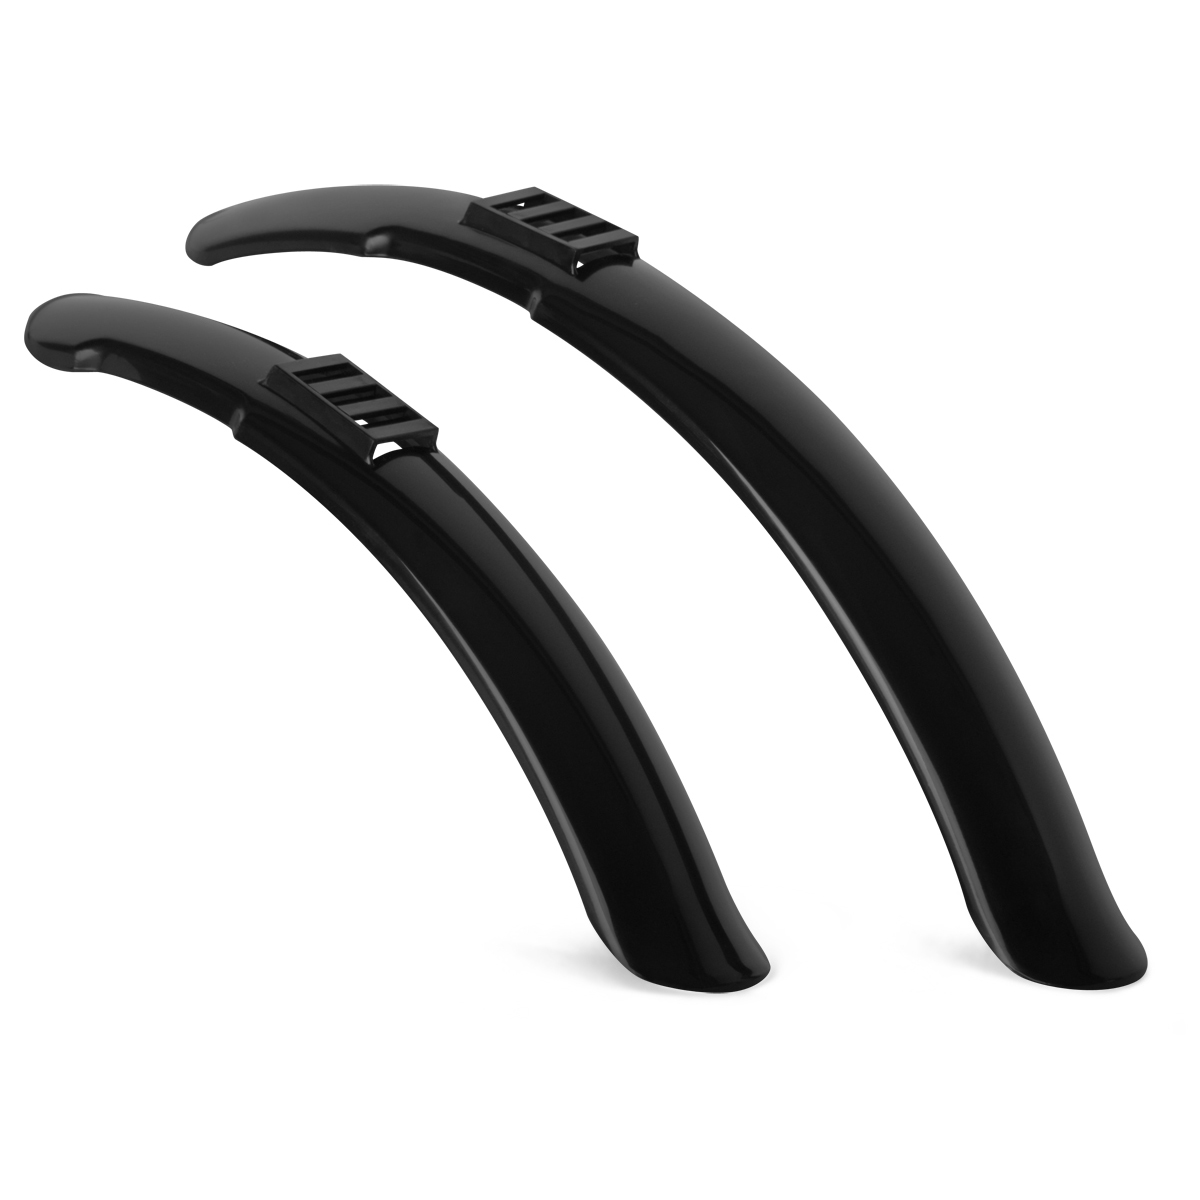 Front and rear mudguard for 20” bicycles